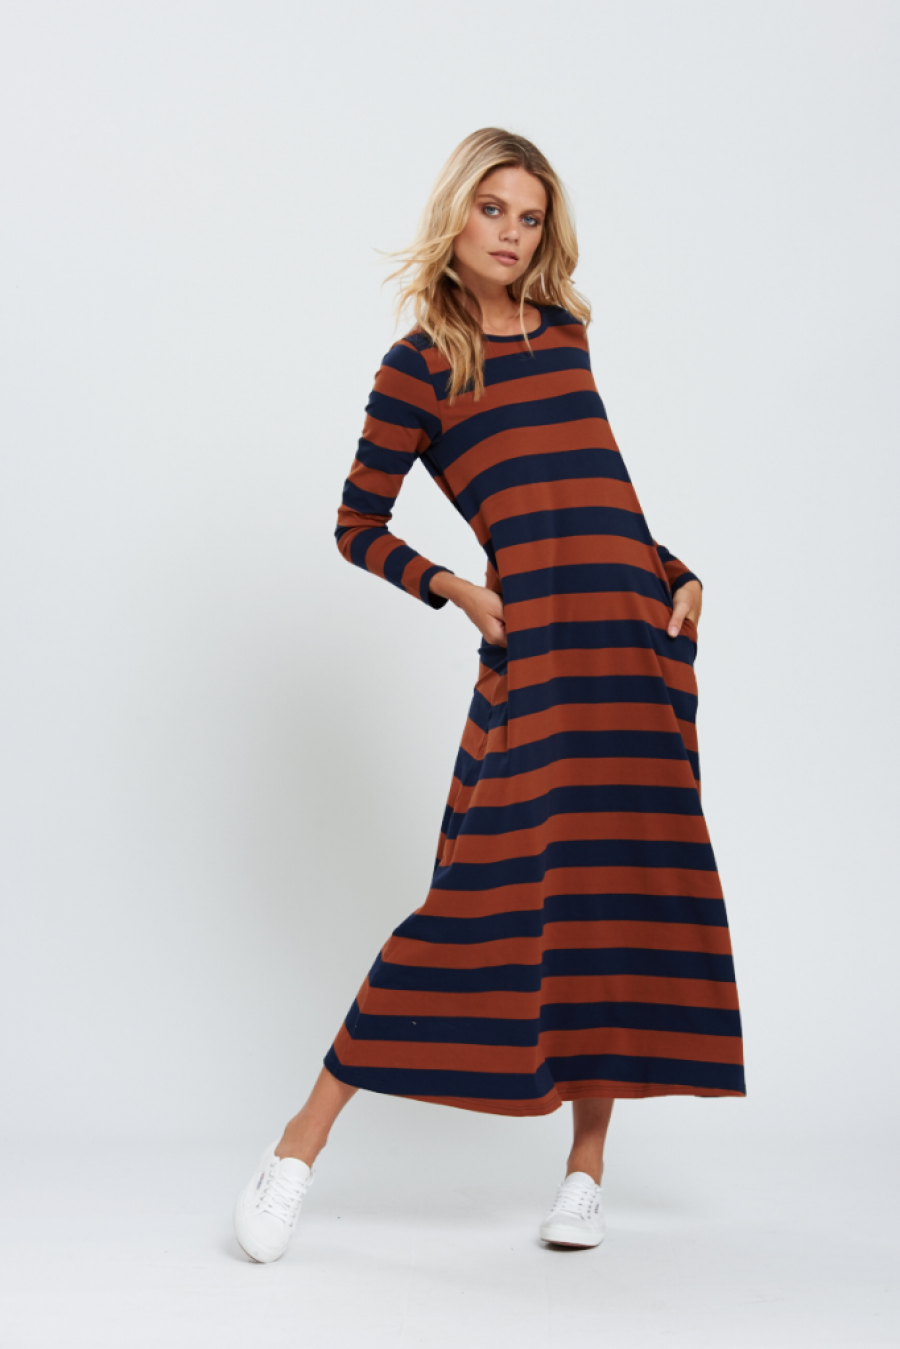 See Need Want Fashion Autumn Must Have Striped Maxi Dress Bohemian Traders